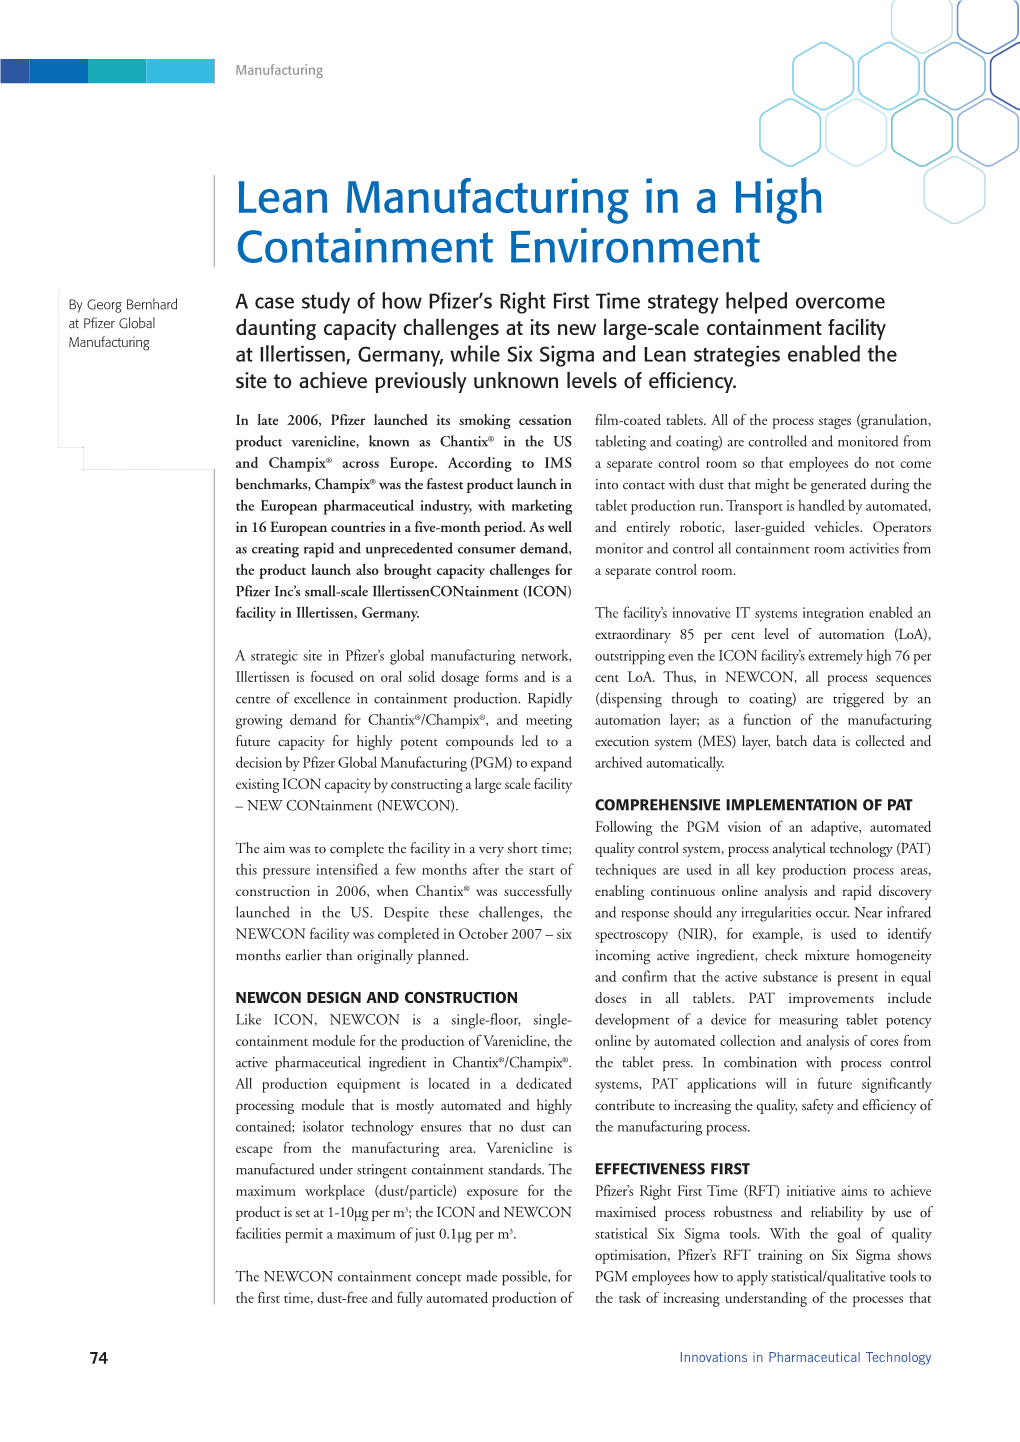 Lean Manufacturing in a High Containment Environment